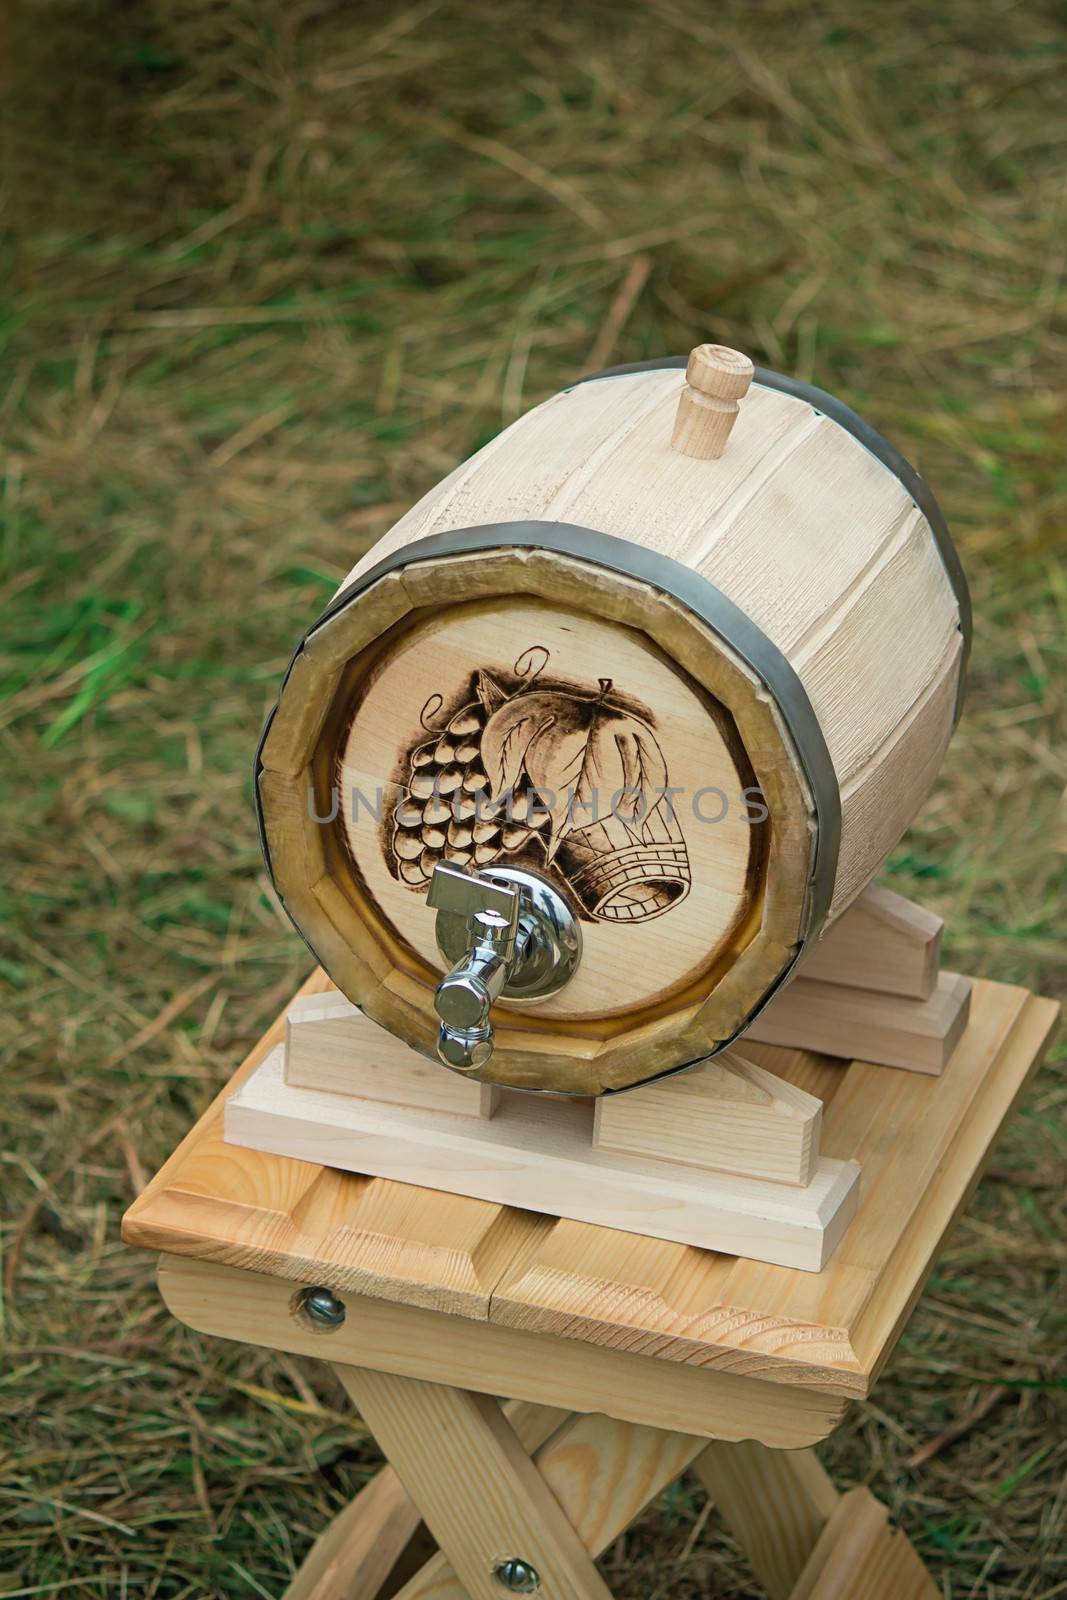 Beautifully decorated with oak barrel with a metal crane, is located on a convenient wooden stand.